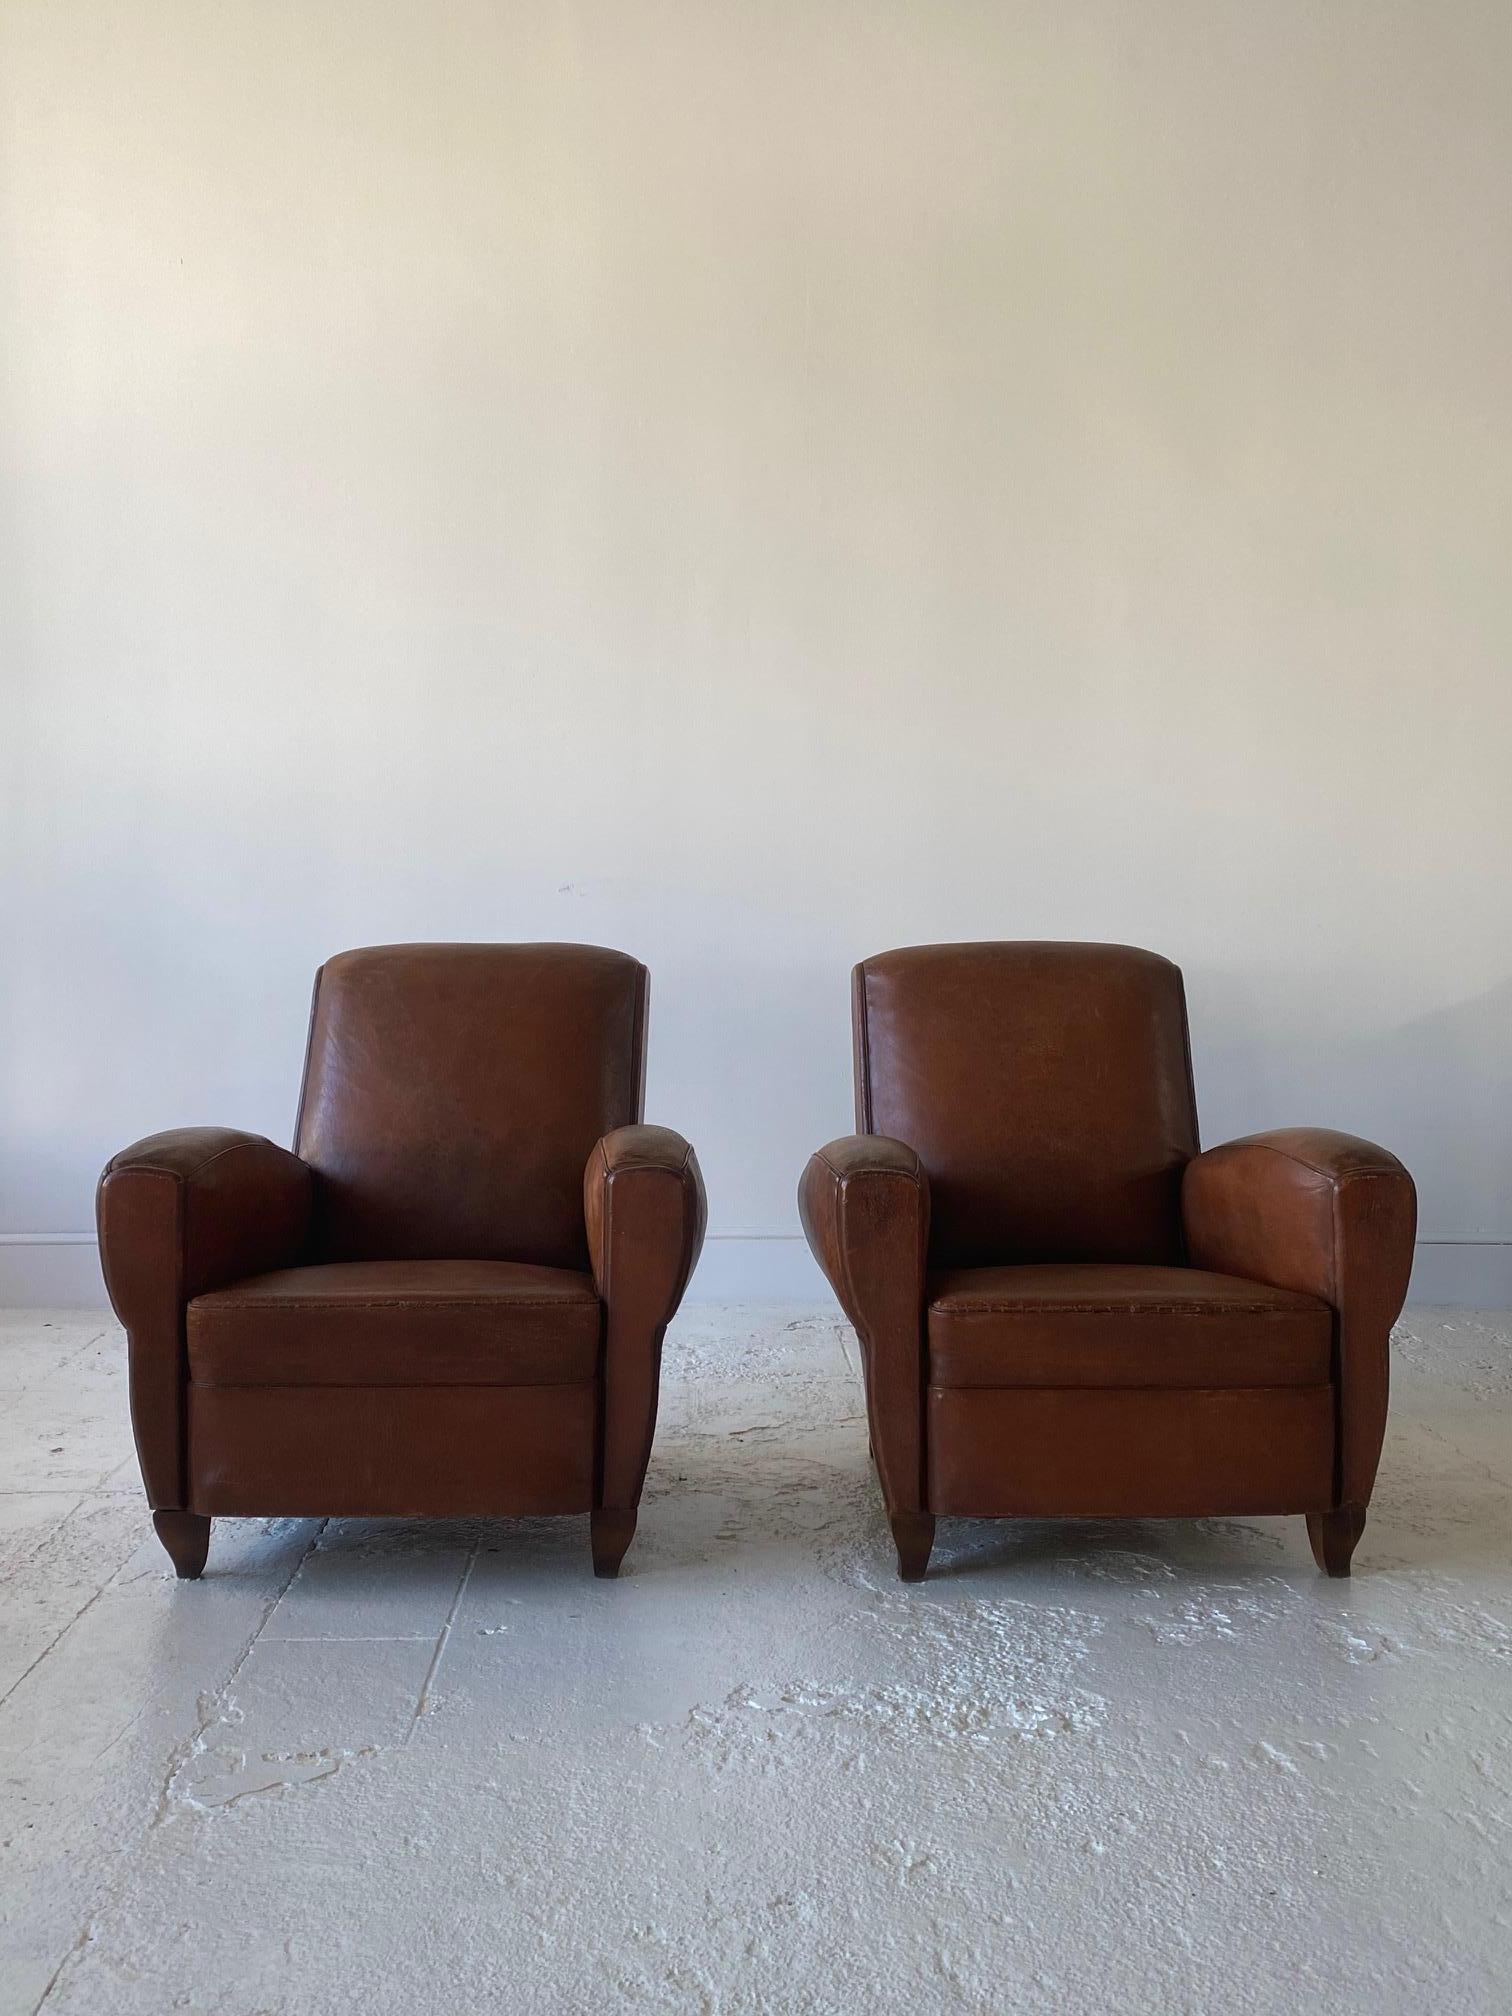 Pair of beautifully aged French leathers club chairs, the chairs offer perfect proportions. The leather offers a beautiful patina.